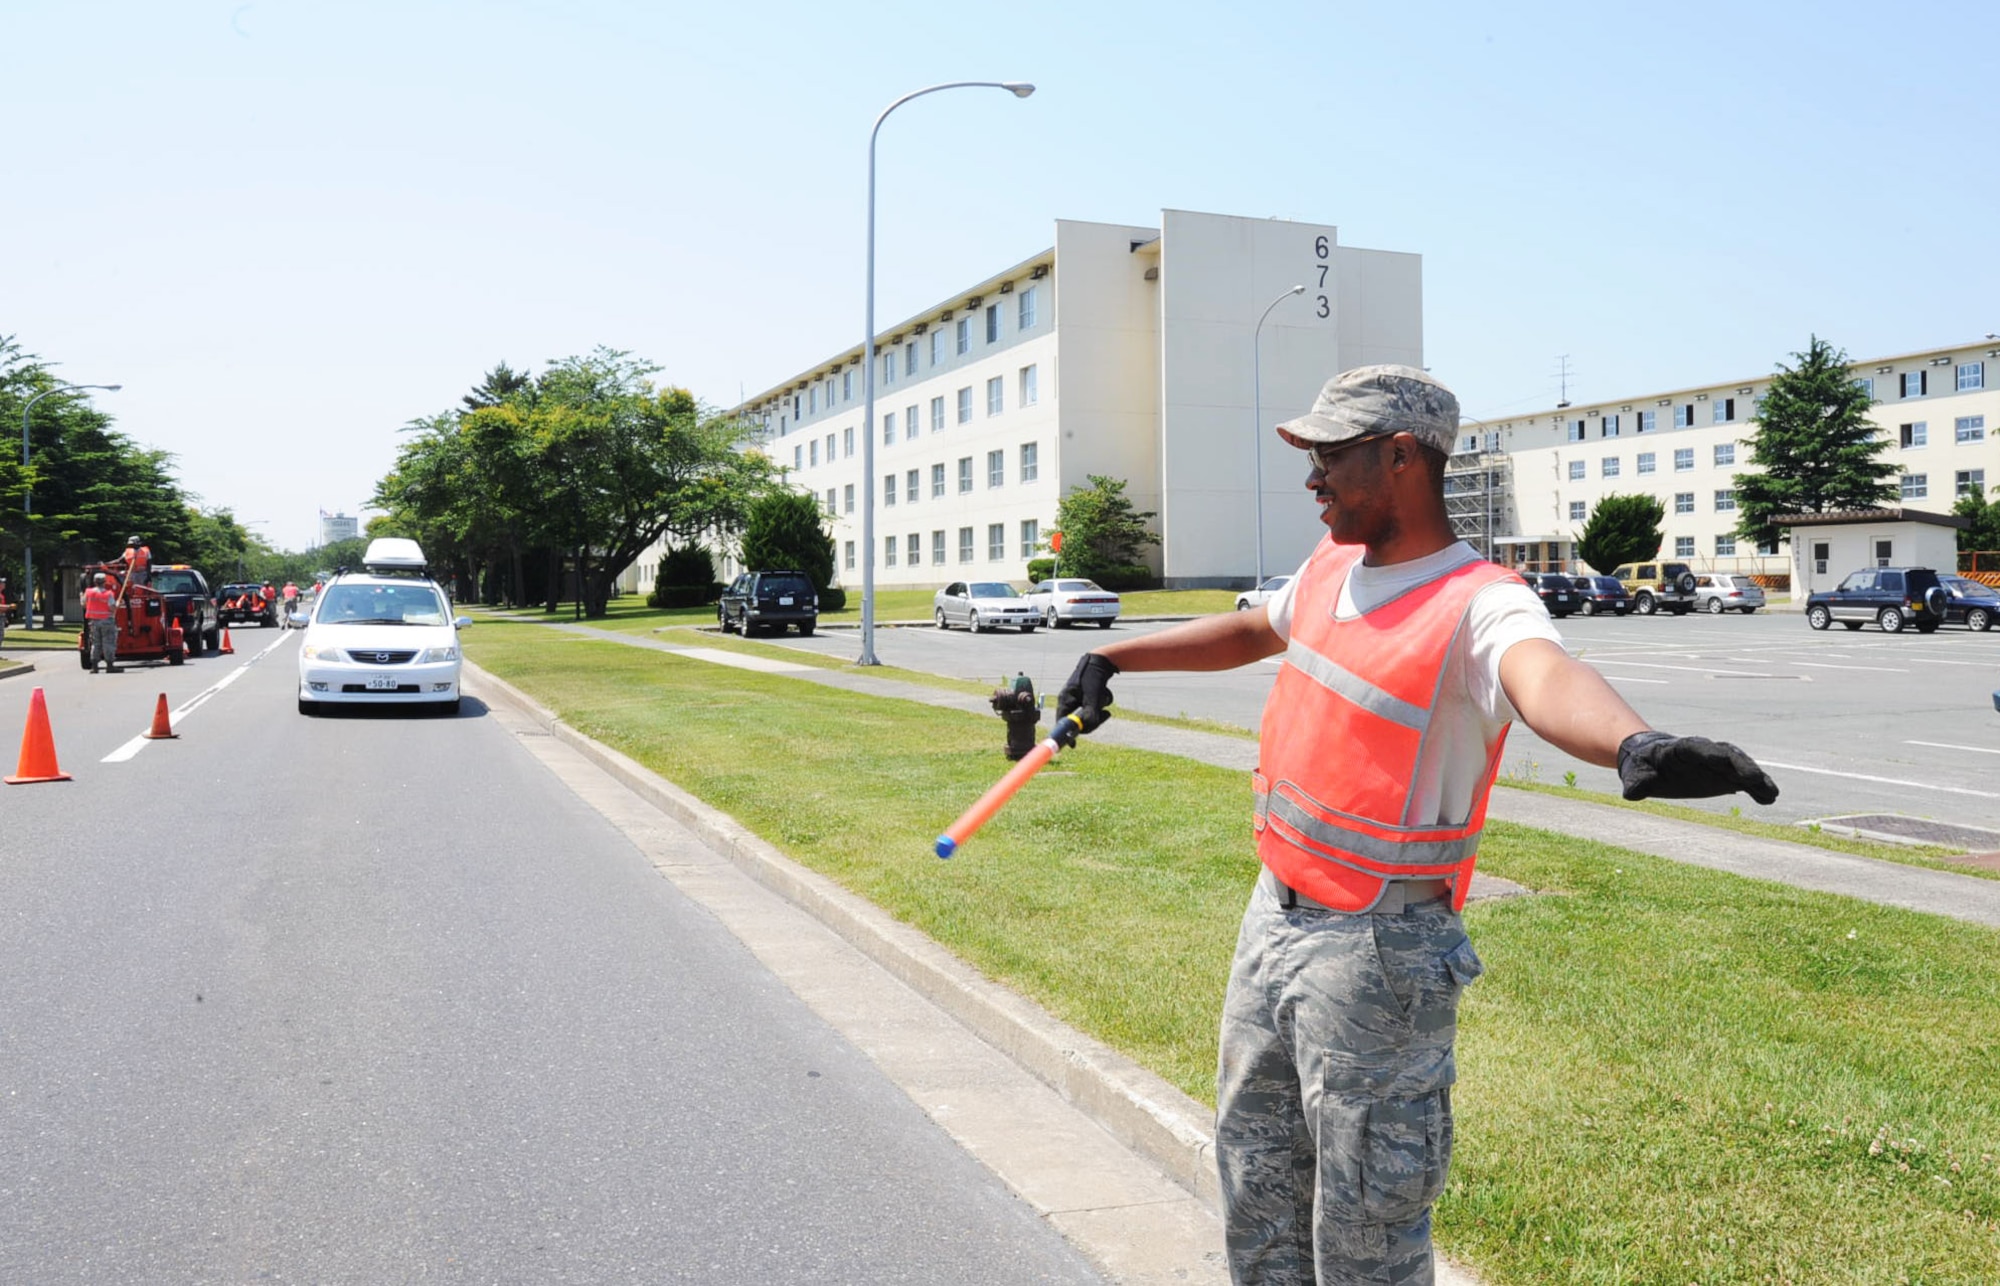 U.S. Air Force Airman 1st Class Edward Bistow, 35th Civil Engineer Squadron pavement and construction shop member, directs traffic on Freedom Drive while his team works on repairing the cracks at Misawa Air Base, Japan, June 27, 2012. The road repair of Freedom Drive is scheduled to be completed sometime in the next few days. (U.S. Air Force photo by Airman 1st Class Kenna Jackson/Released)